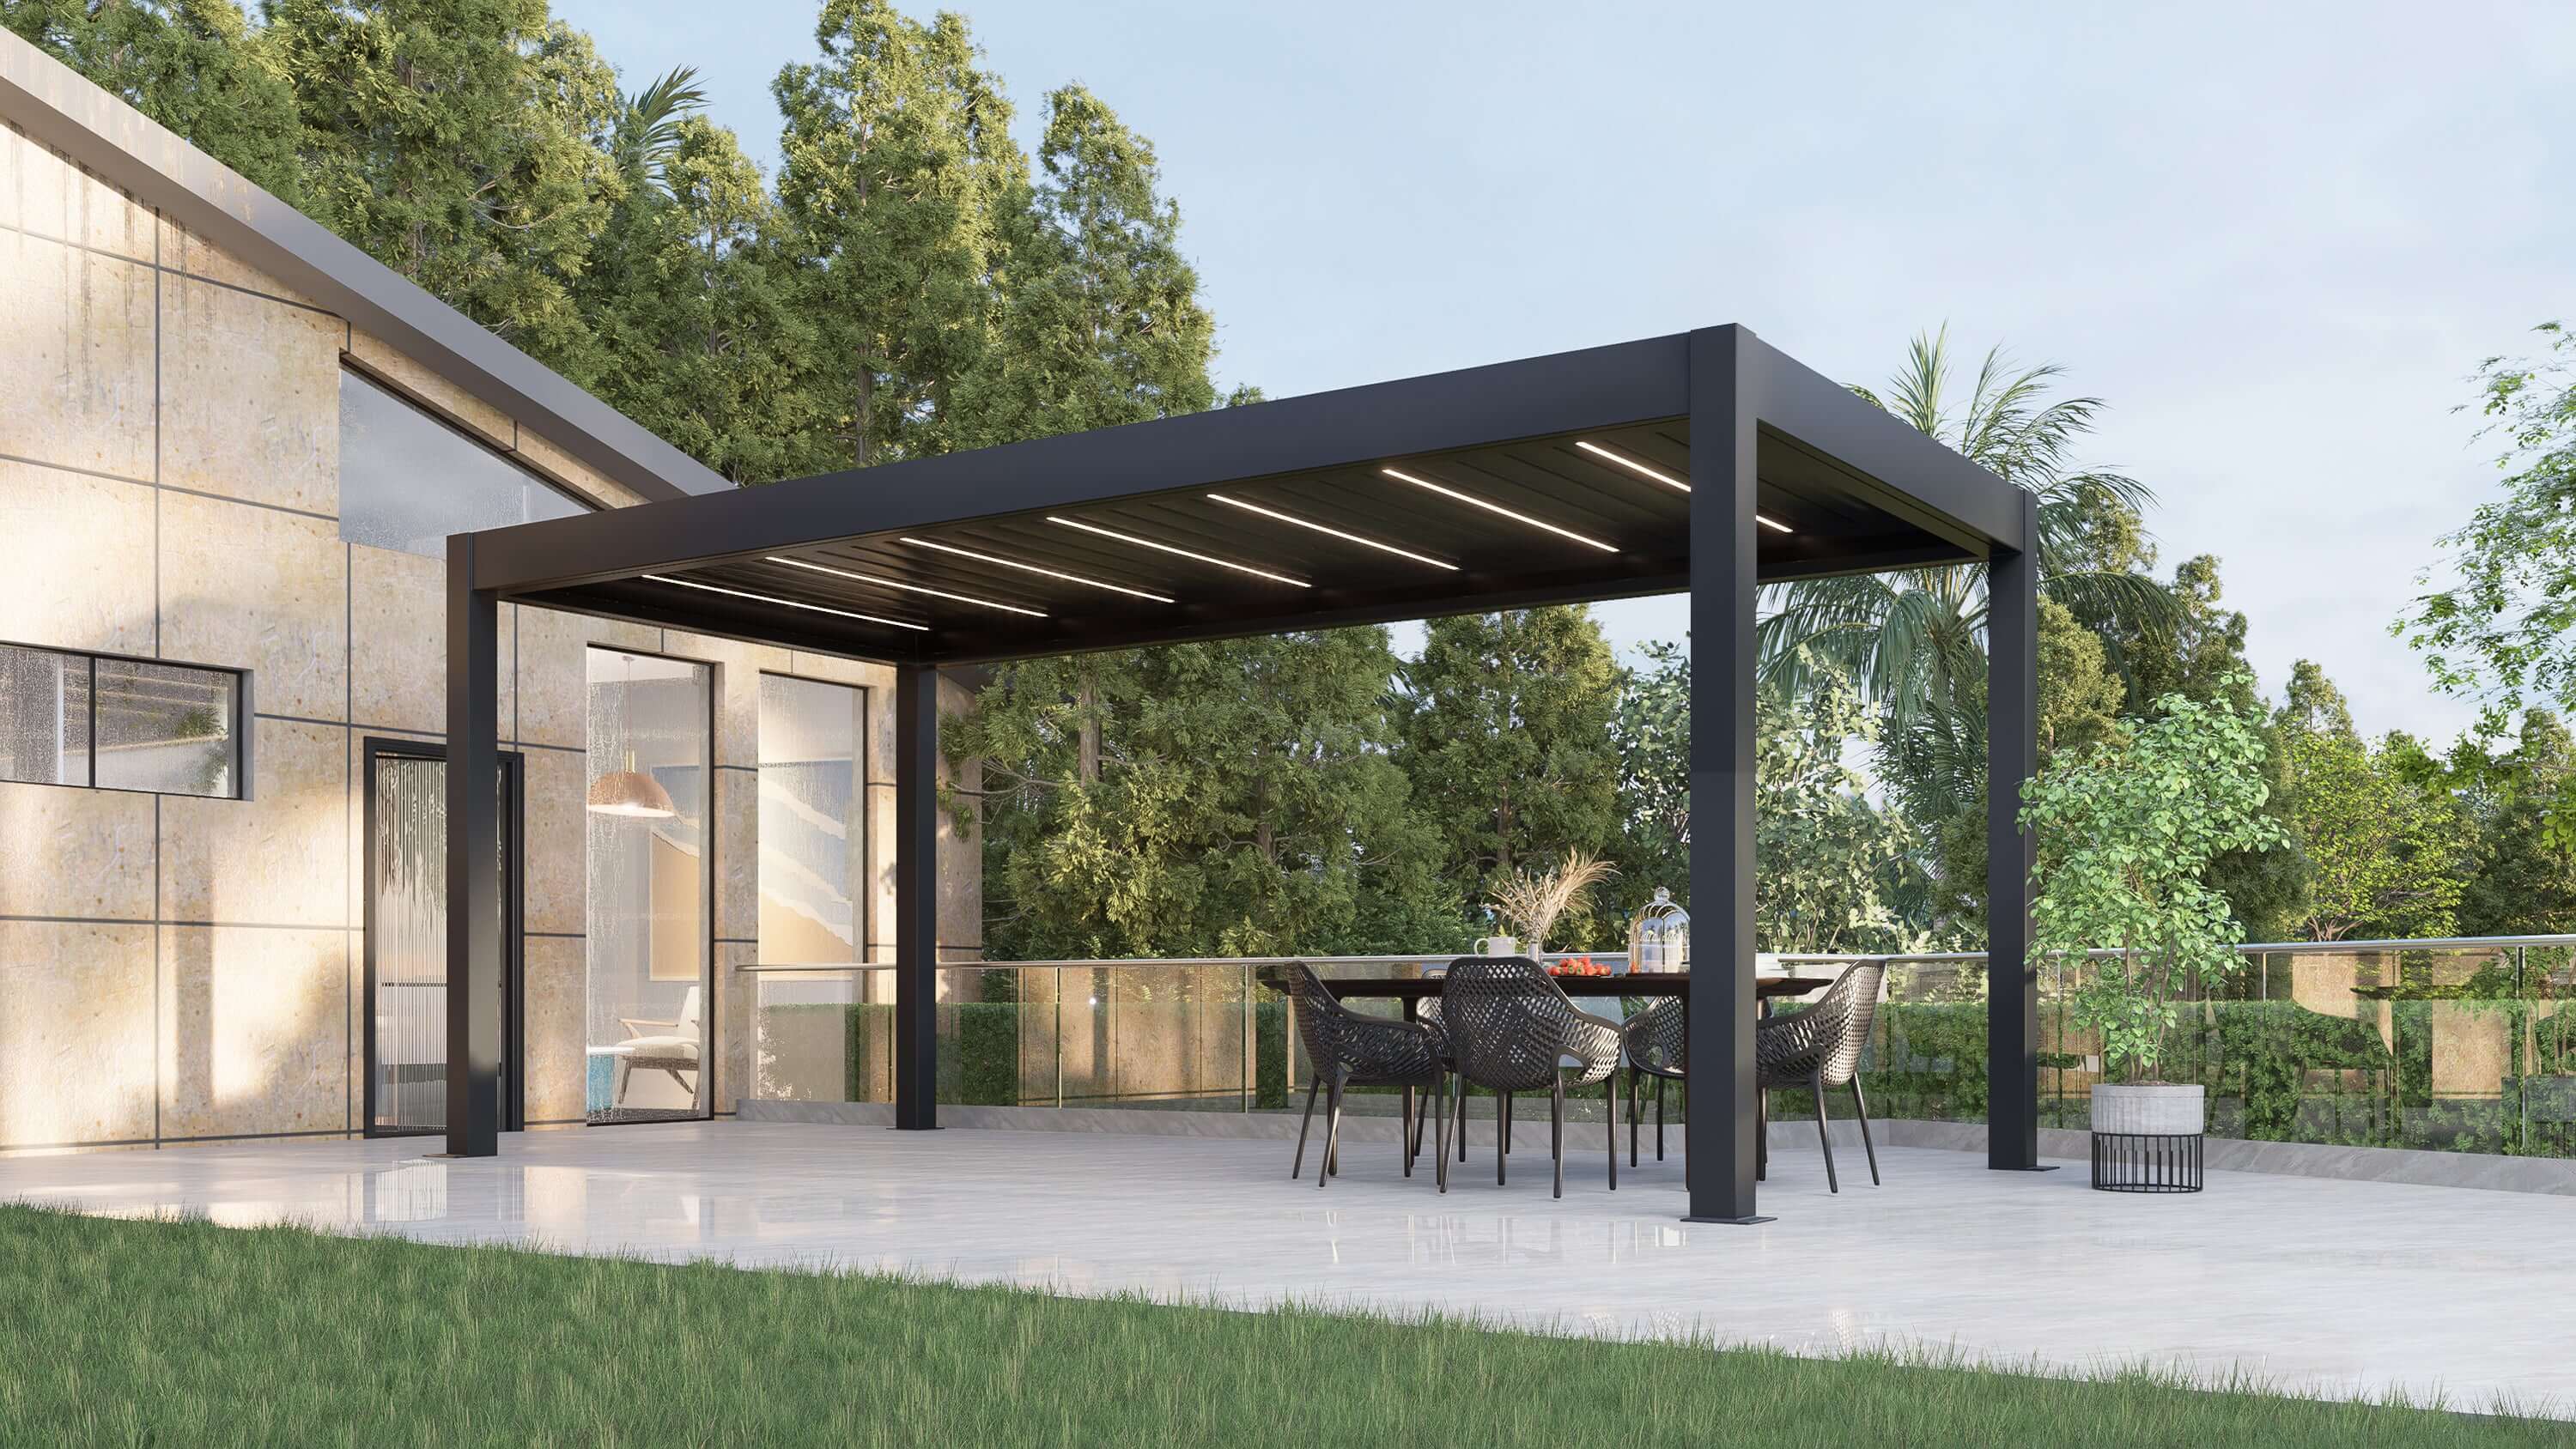 Heavy-duty aluminum pergola with motorized louvers, LED lighting, and gutter system. Provides privacy and protection from the elements.